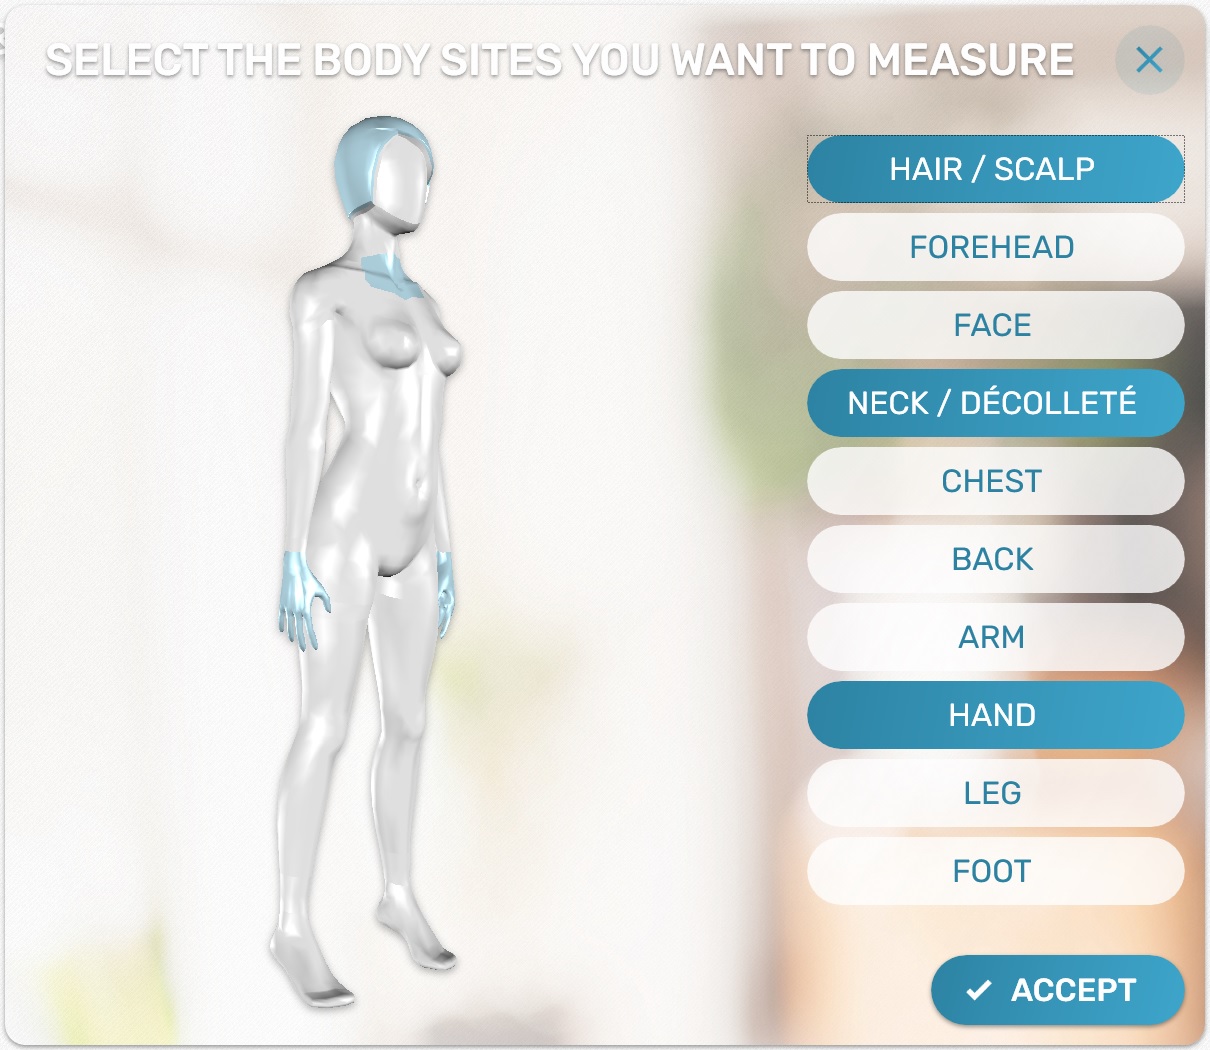 Take images and perform measurements throughout the whole body